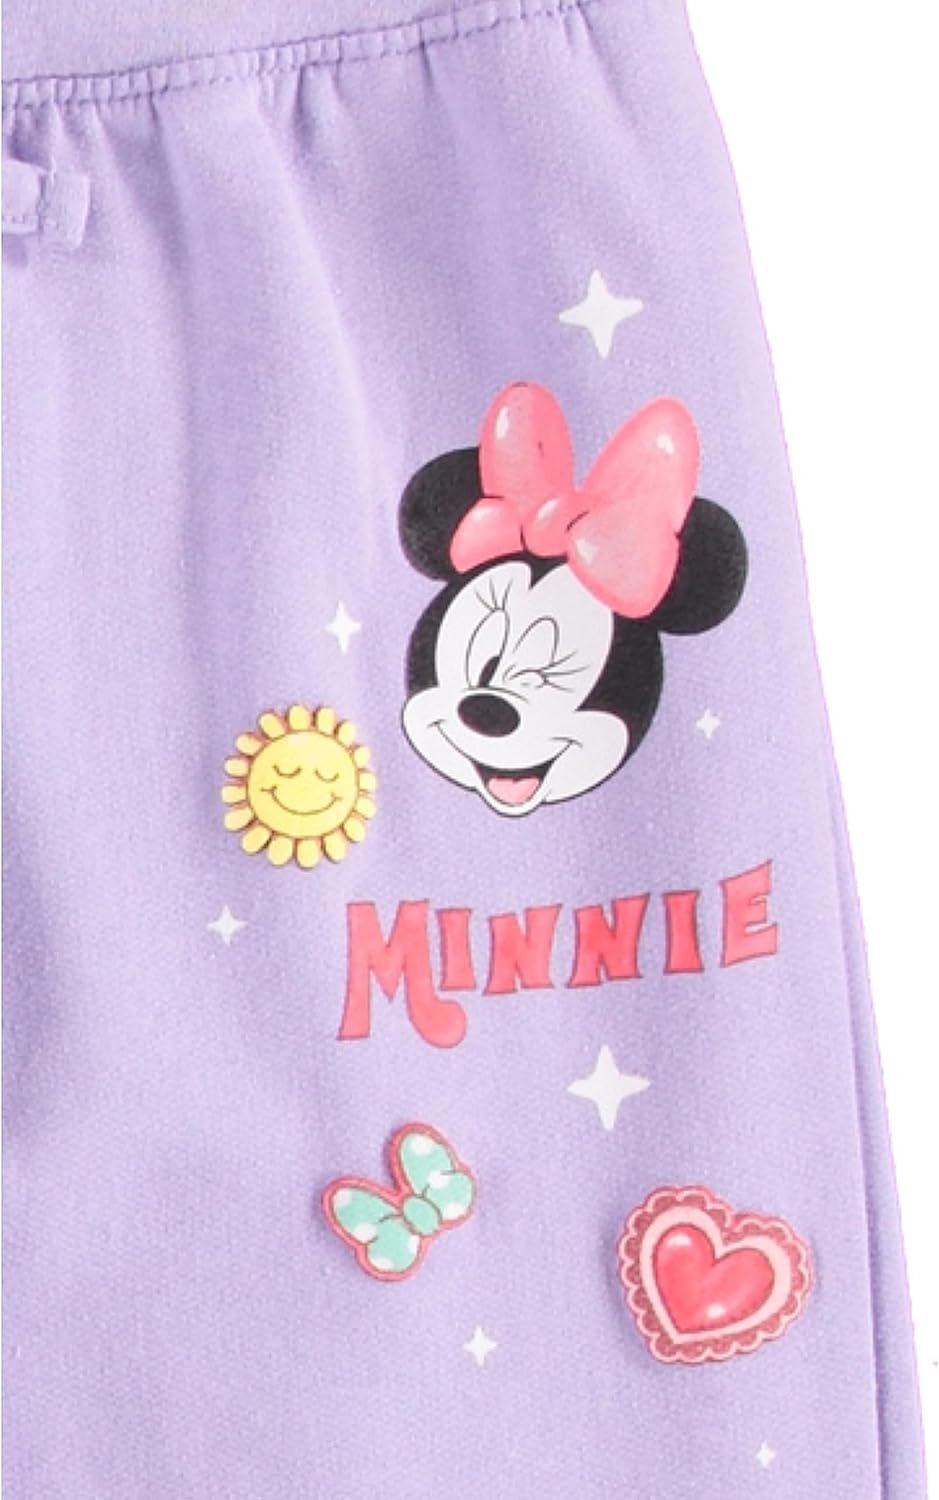 Disney Girls Minnie Mouse Hoodie and Jogger Clothing Set - Sizes 4-16